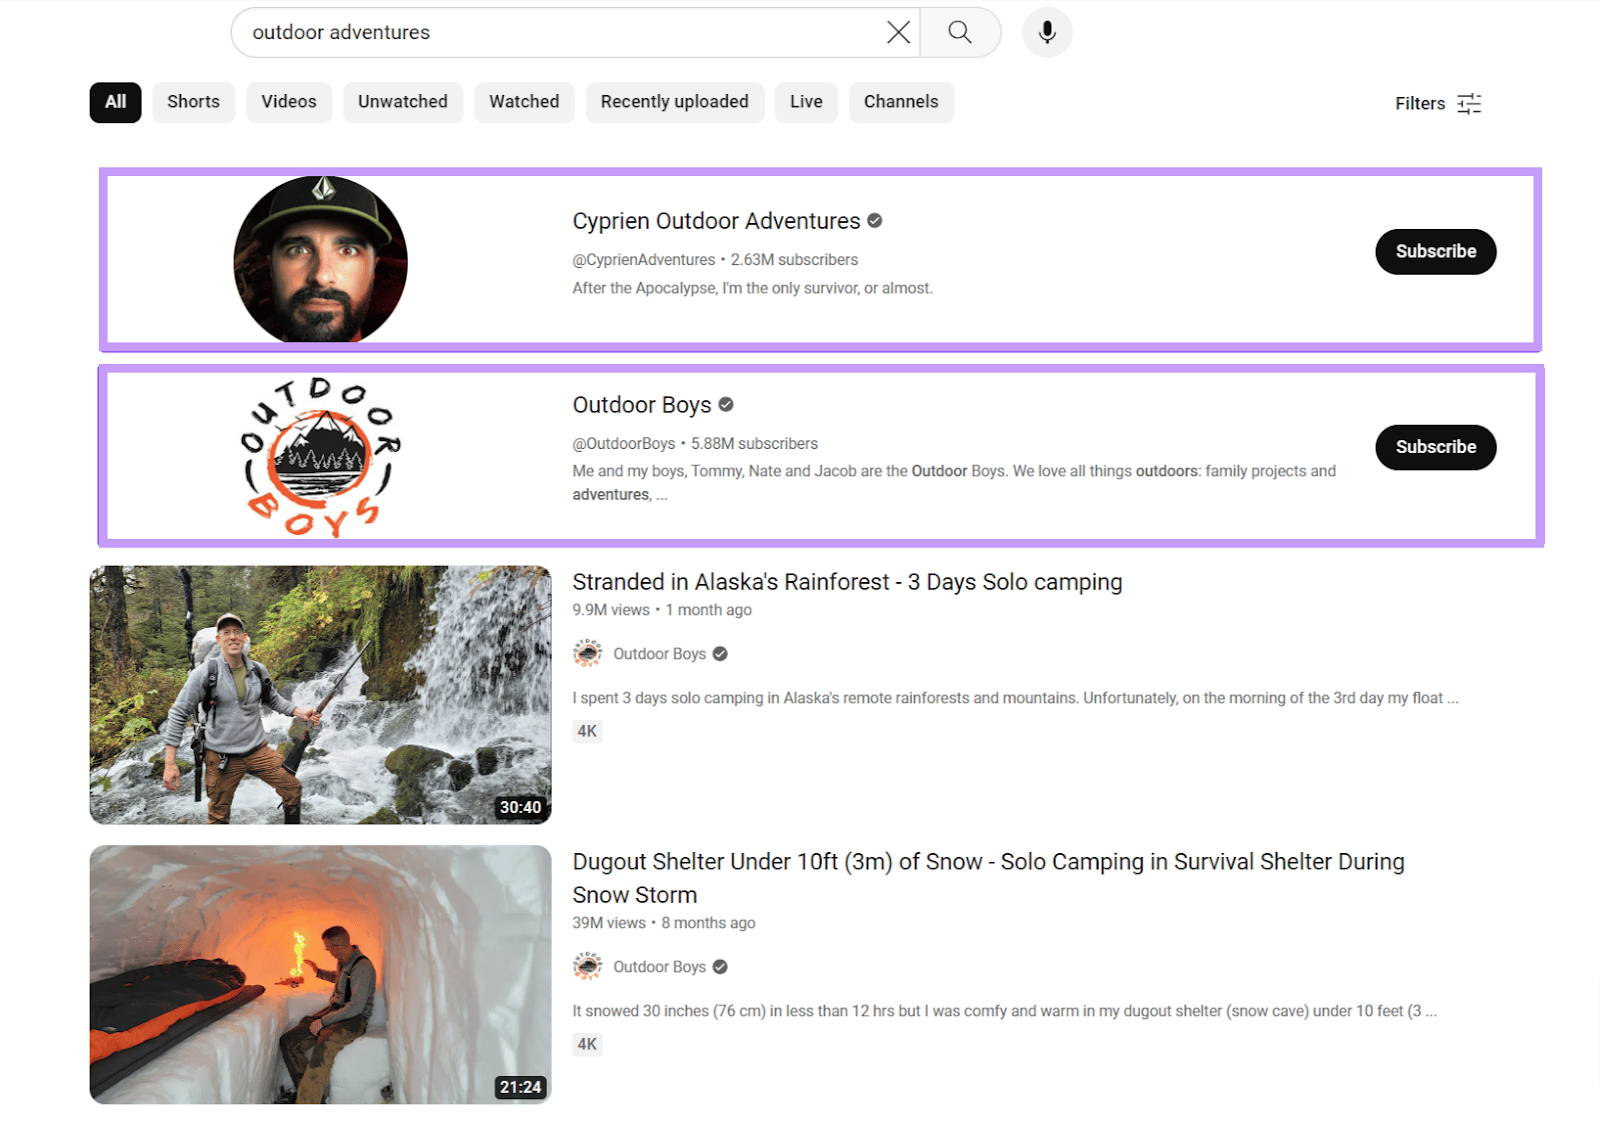 "Cyprien Outdoor Adventures," and "Outdoor Boys" channel results for "outdoor adventures" search on YouTube